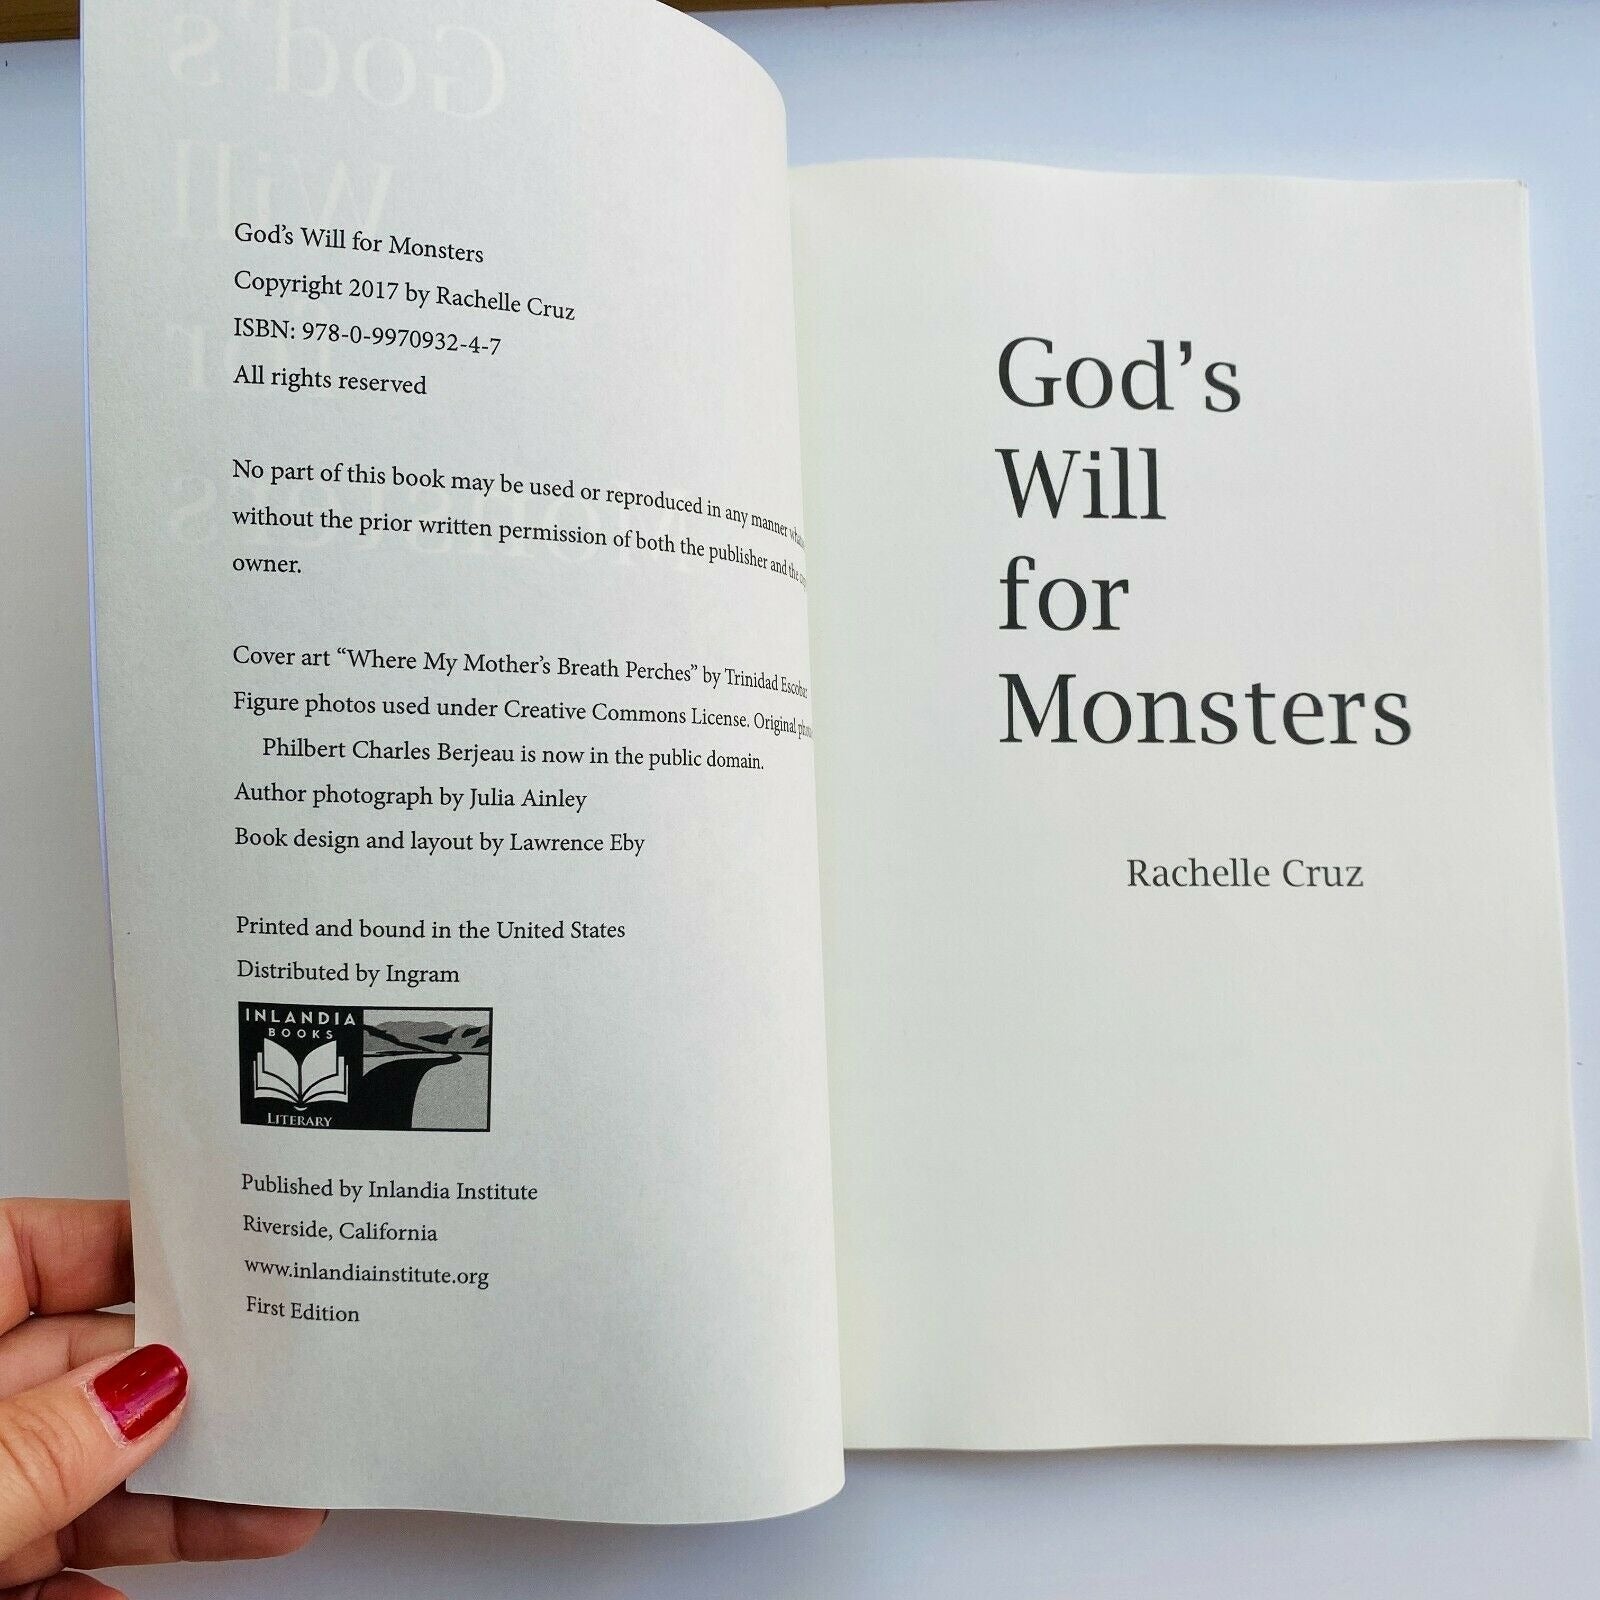 God's Will for Monsters